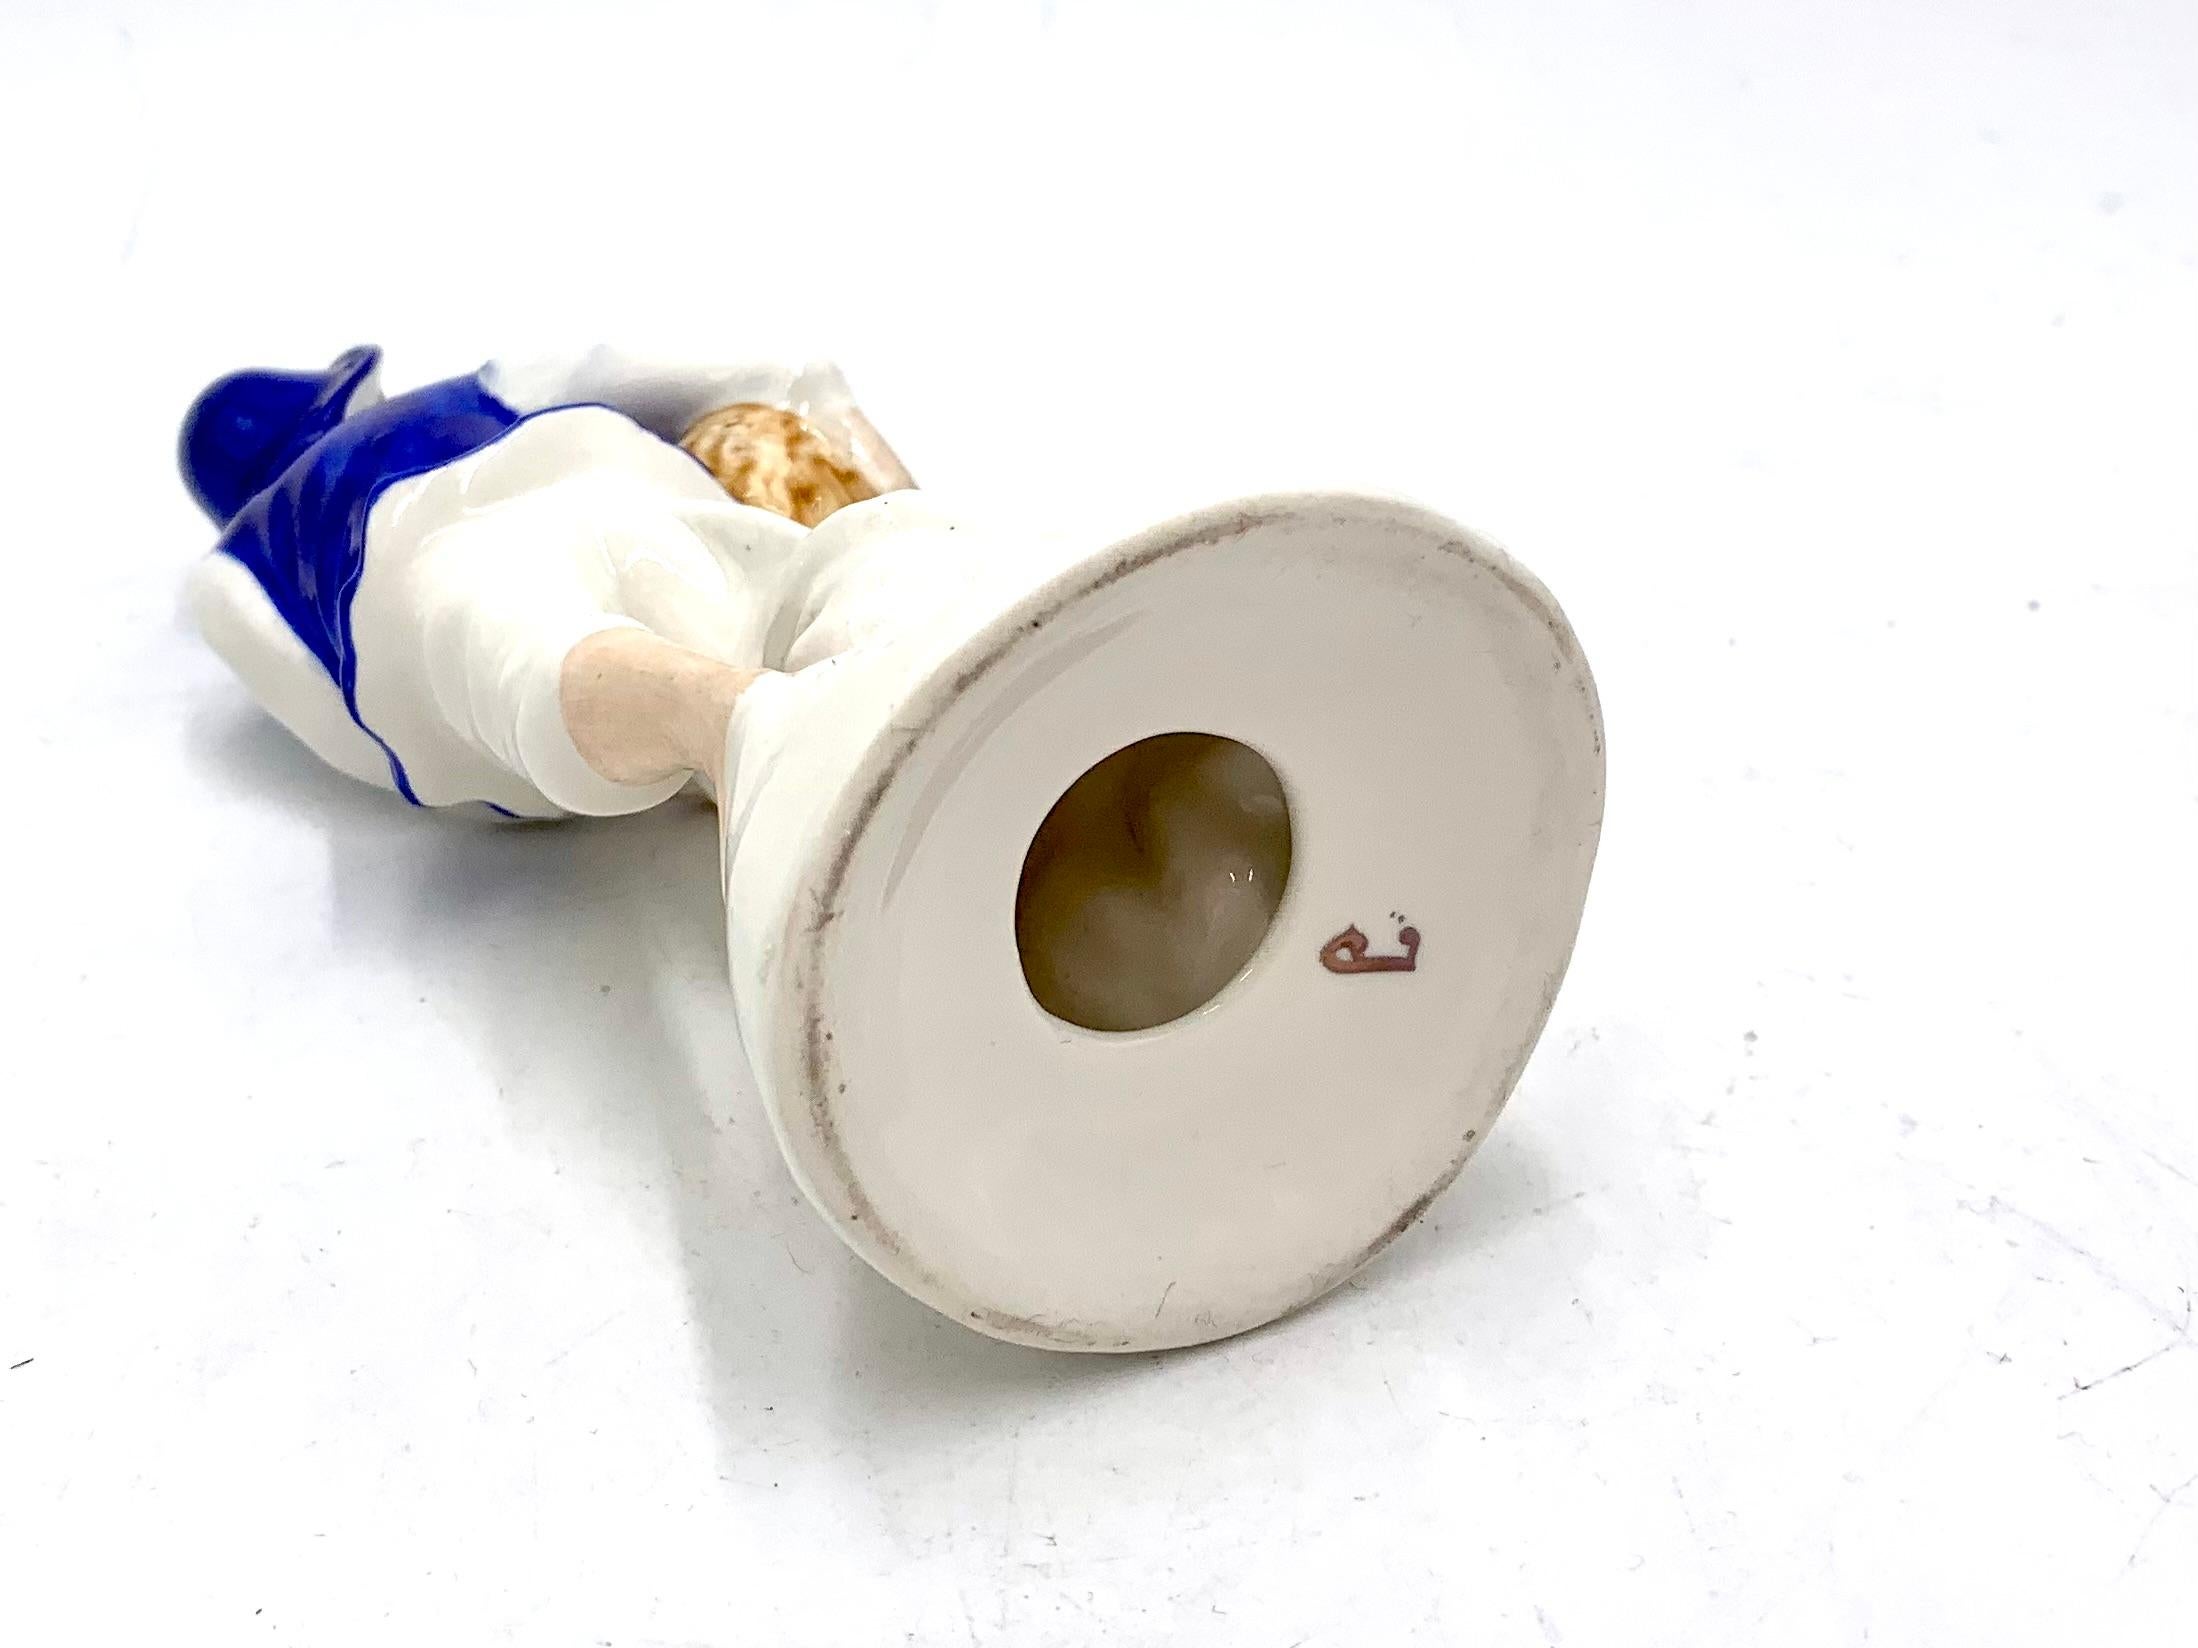 Late 20th Century Porcelain Figurine of a Boy, Jan Jezela, 1970s and 1980s For Sale